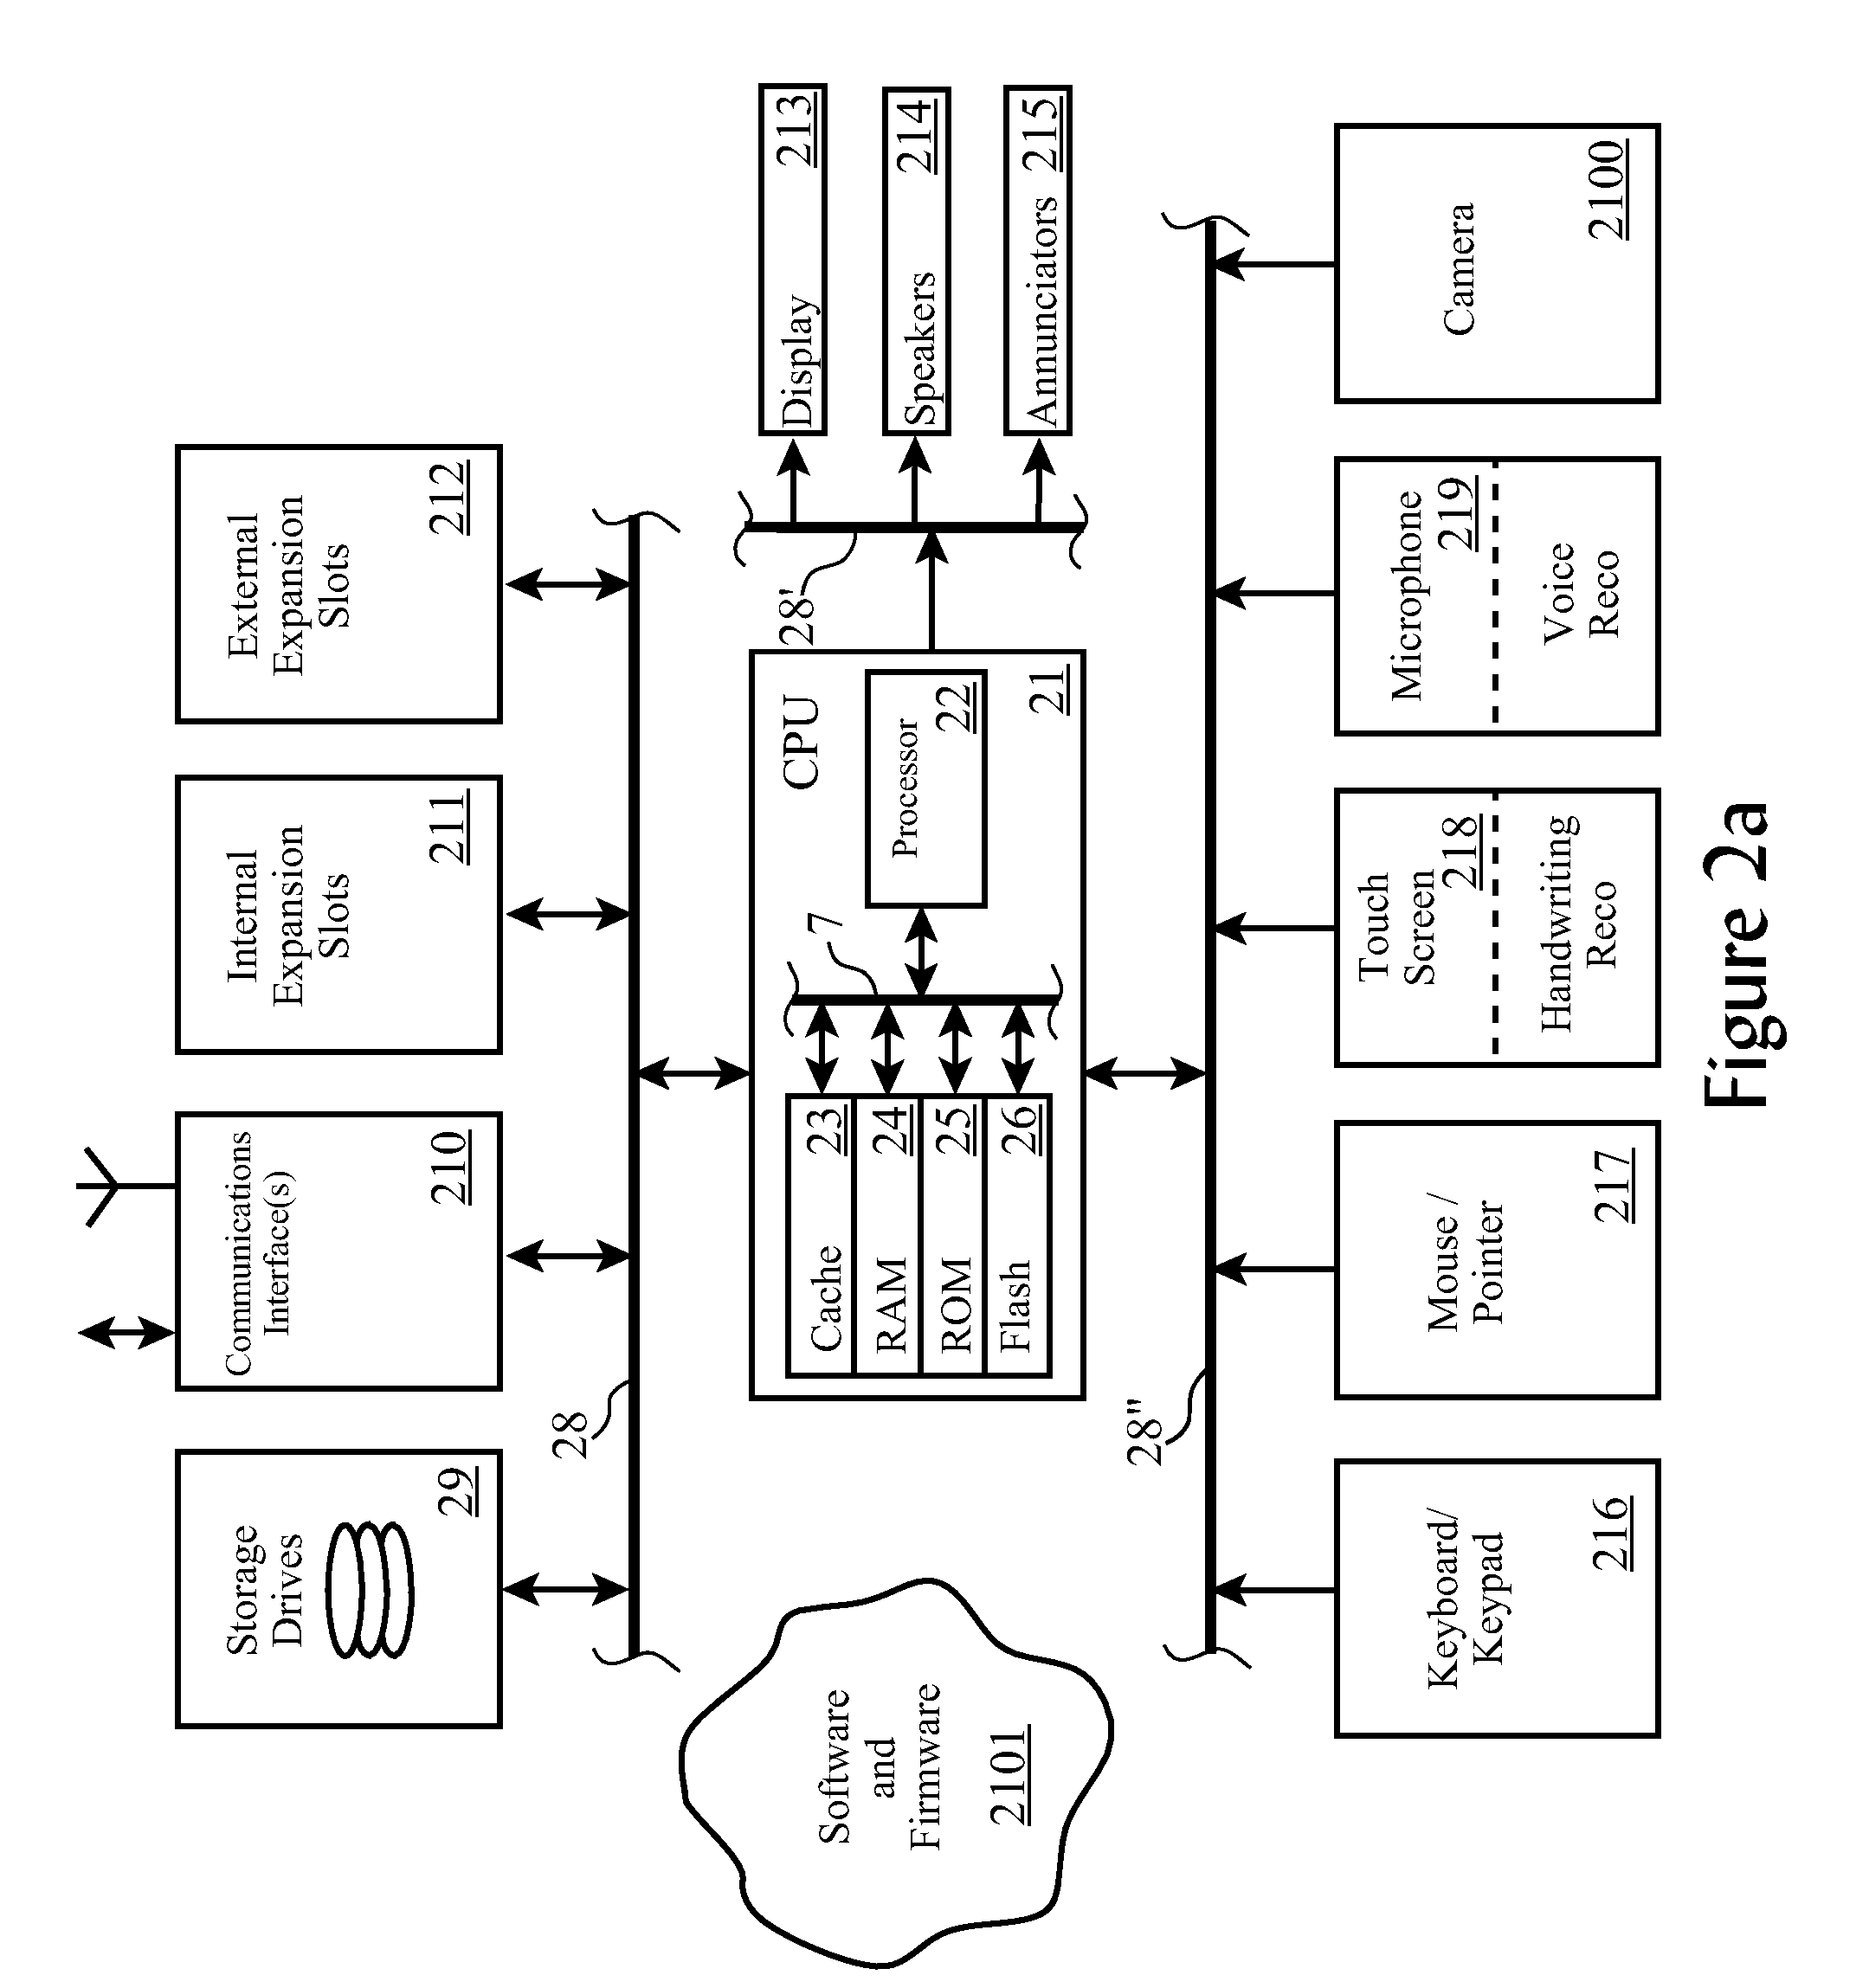 Container Manifest Integrity Maintenance System and Method